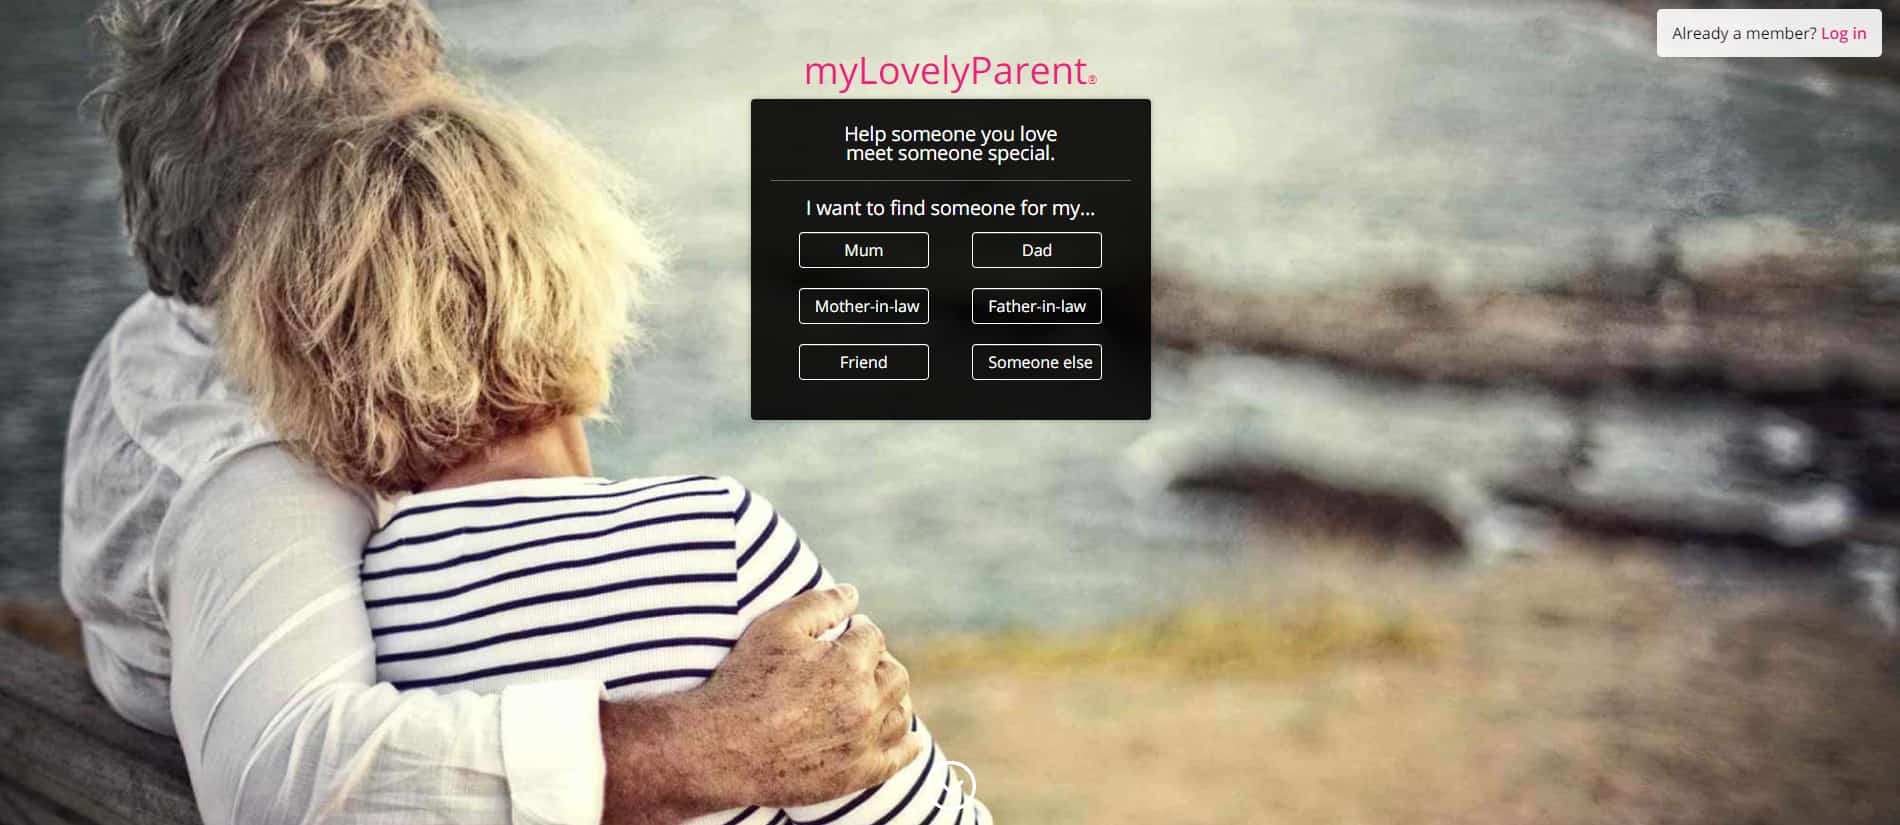 dating sites for single parents